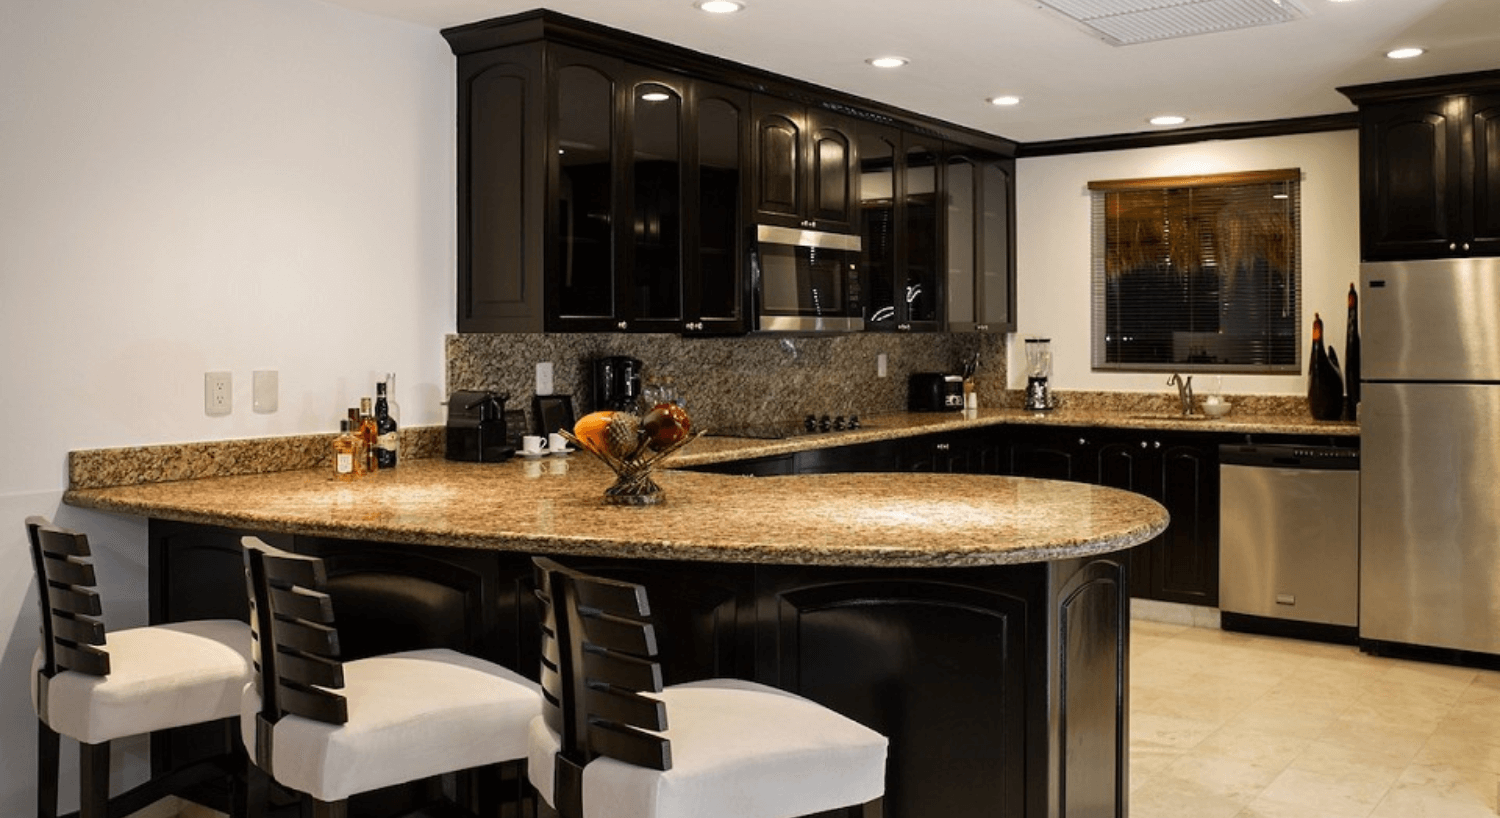 A gourmet kitchen with dark wood cabinets, granite countertops, three white and brown barstools, and stainless steel appliances.